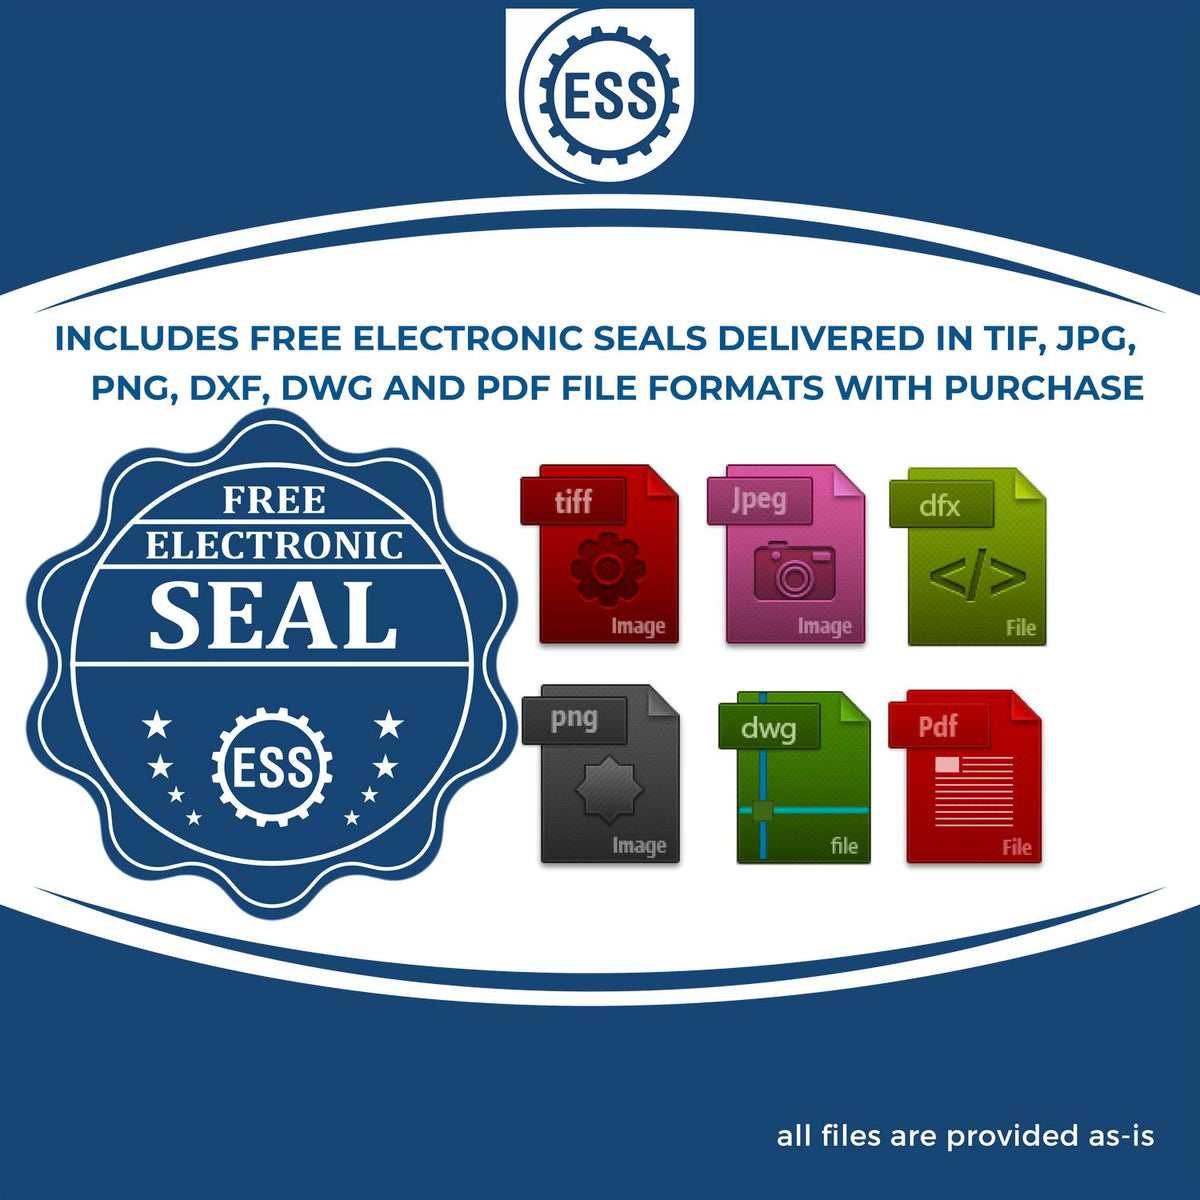 An infographic for the free electronic seal for the New Hampshire Professional Engineer Seal Stamp illustrating the different file type icons such as DXF, DWG, TIF, JPG and PNG.